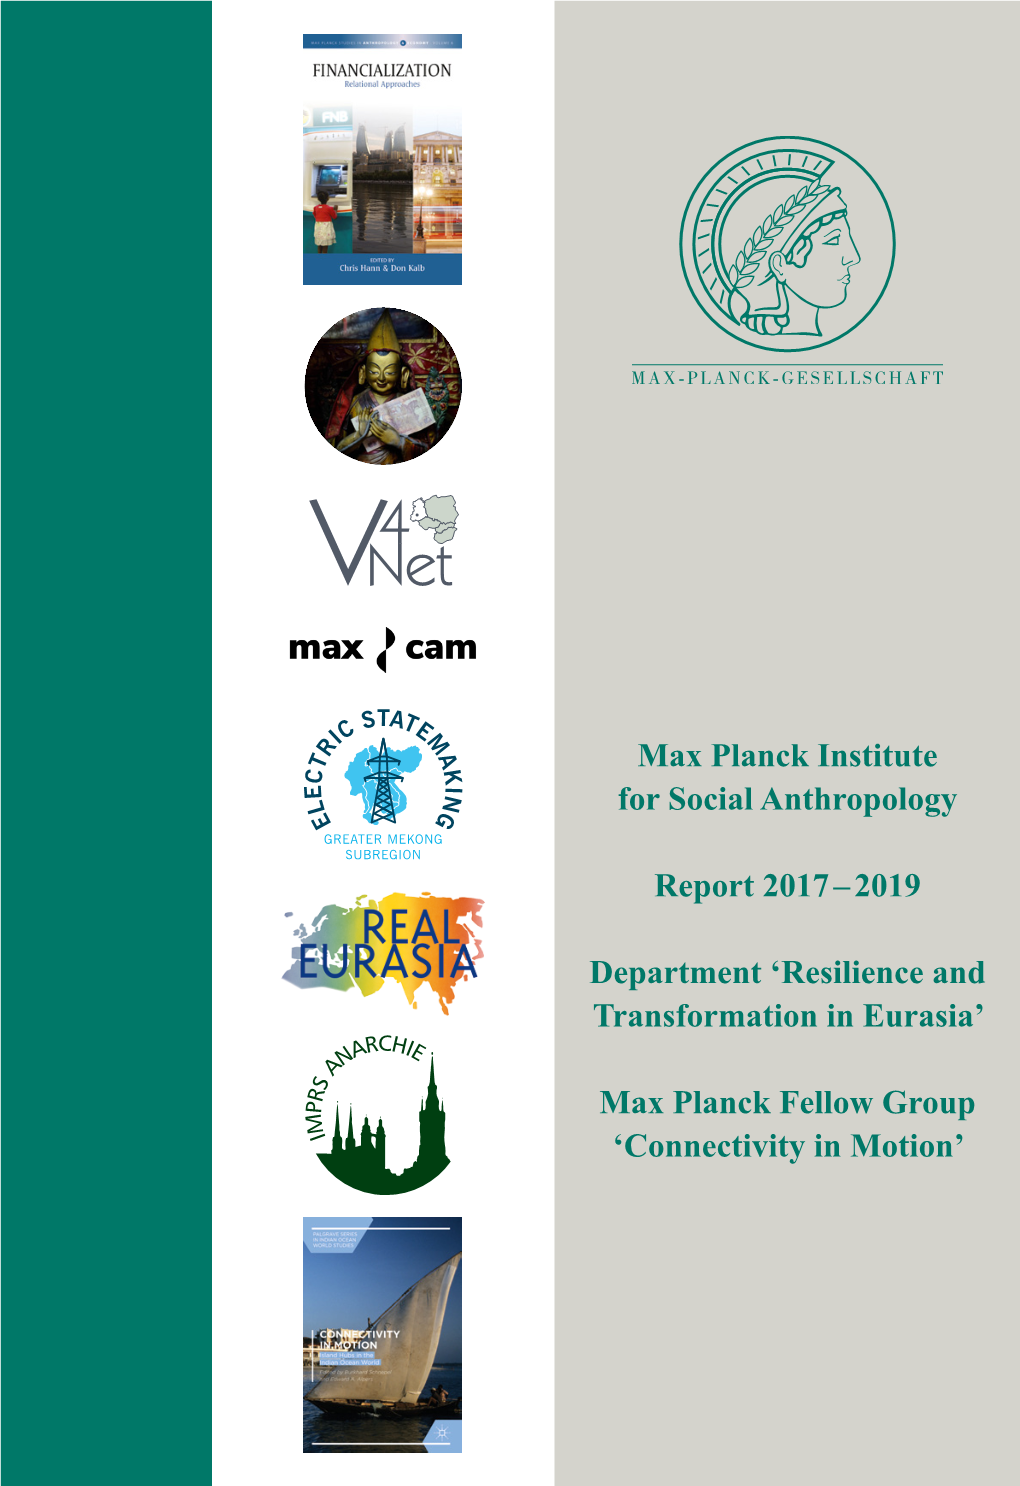 Max Planck Institute for Social Anthropology Report 2017 –2019